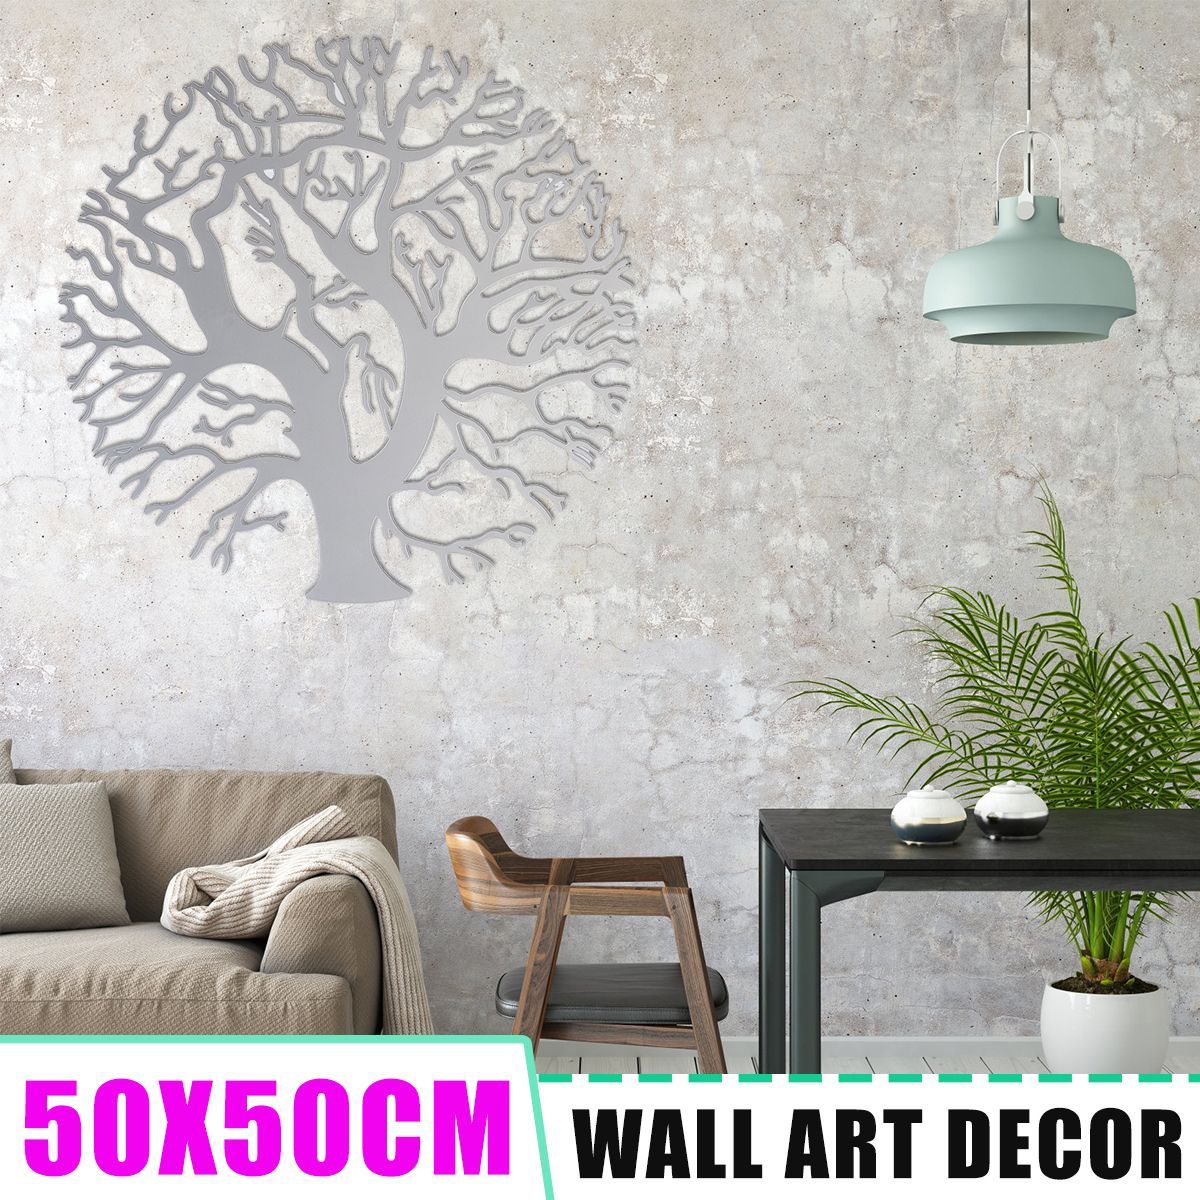 50cm-Round-Tree-of-Life-Metal-Hanging-Wall-Art-Sculpture-Home-Decor-Ornament-1694307